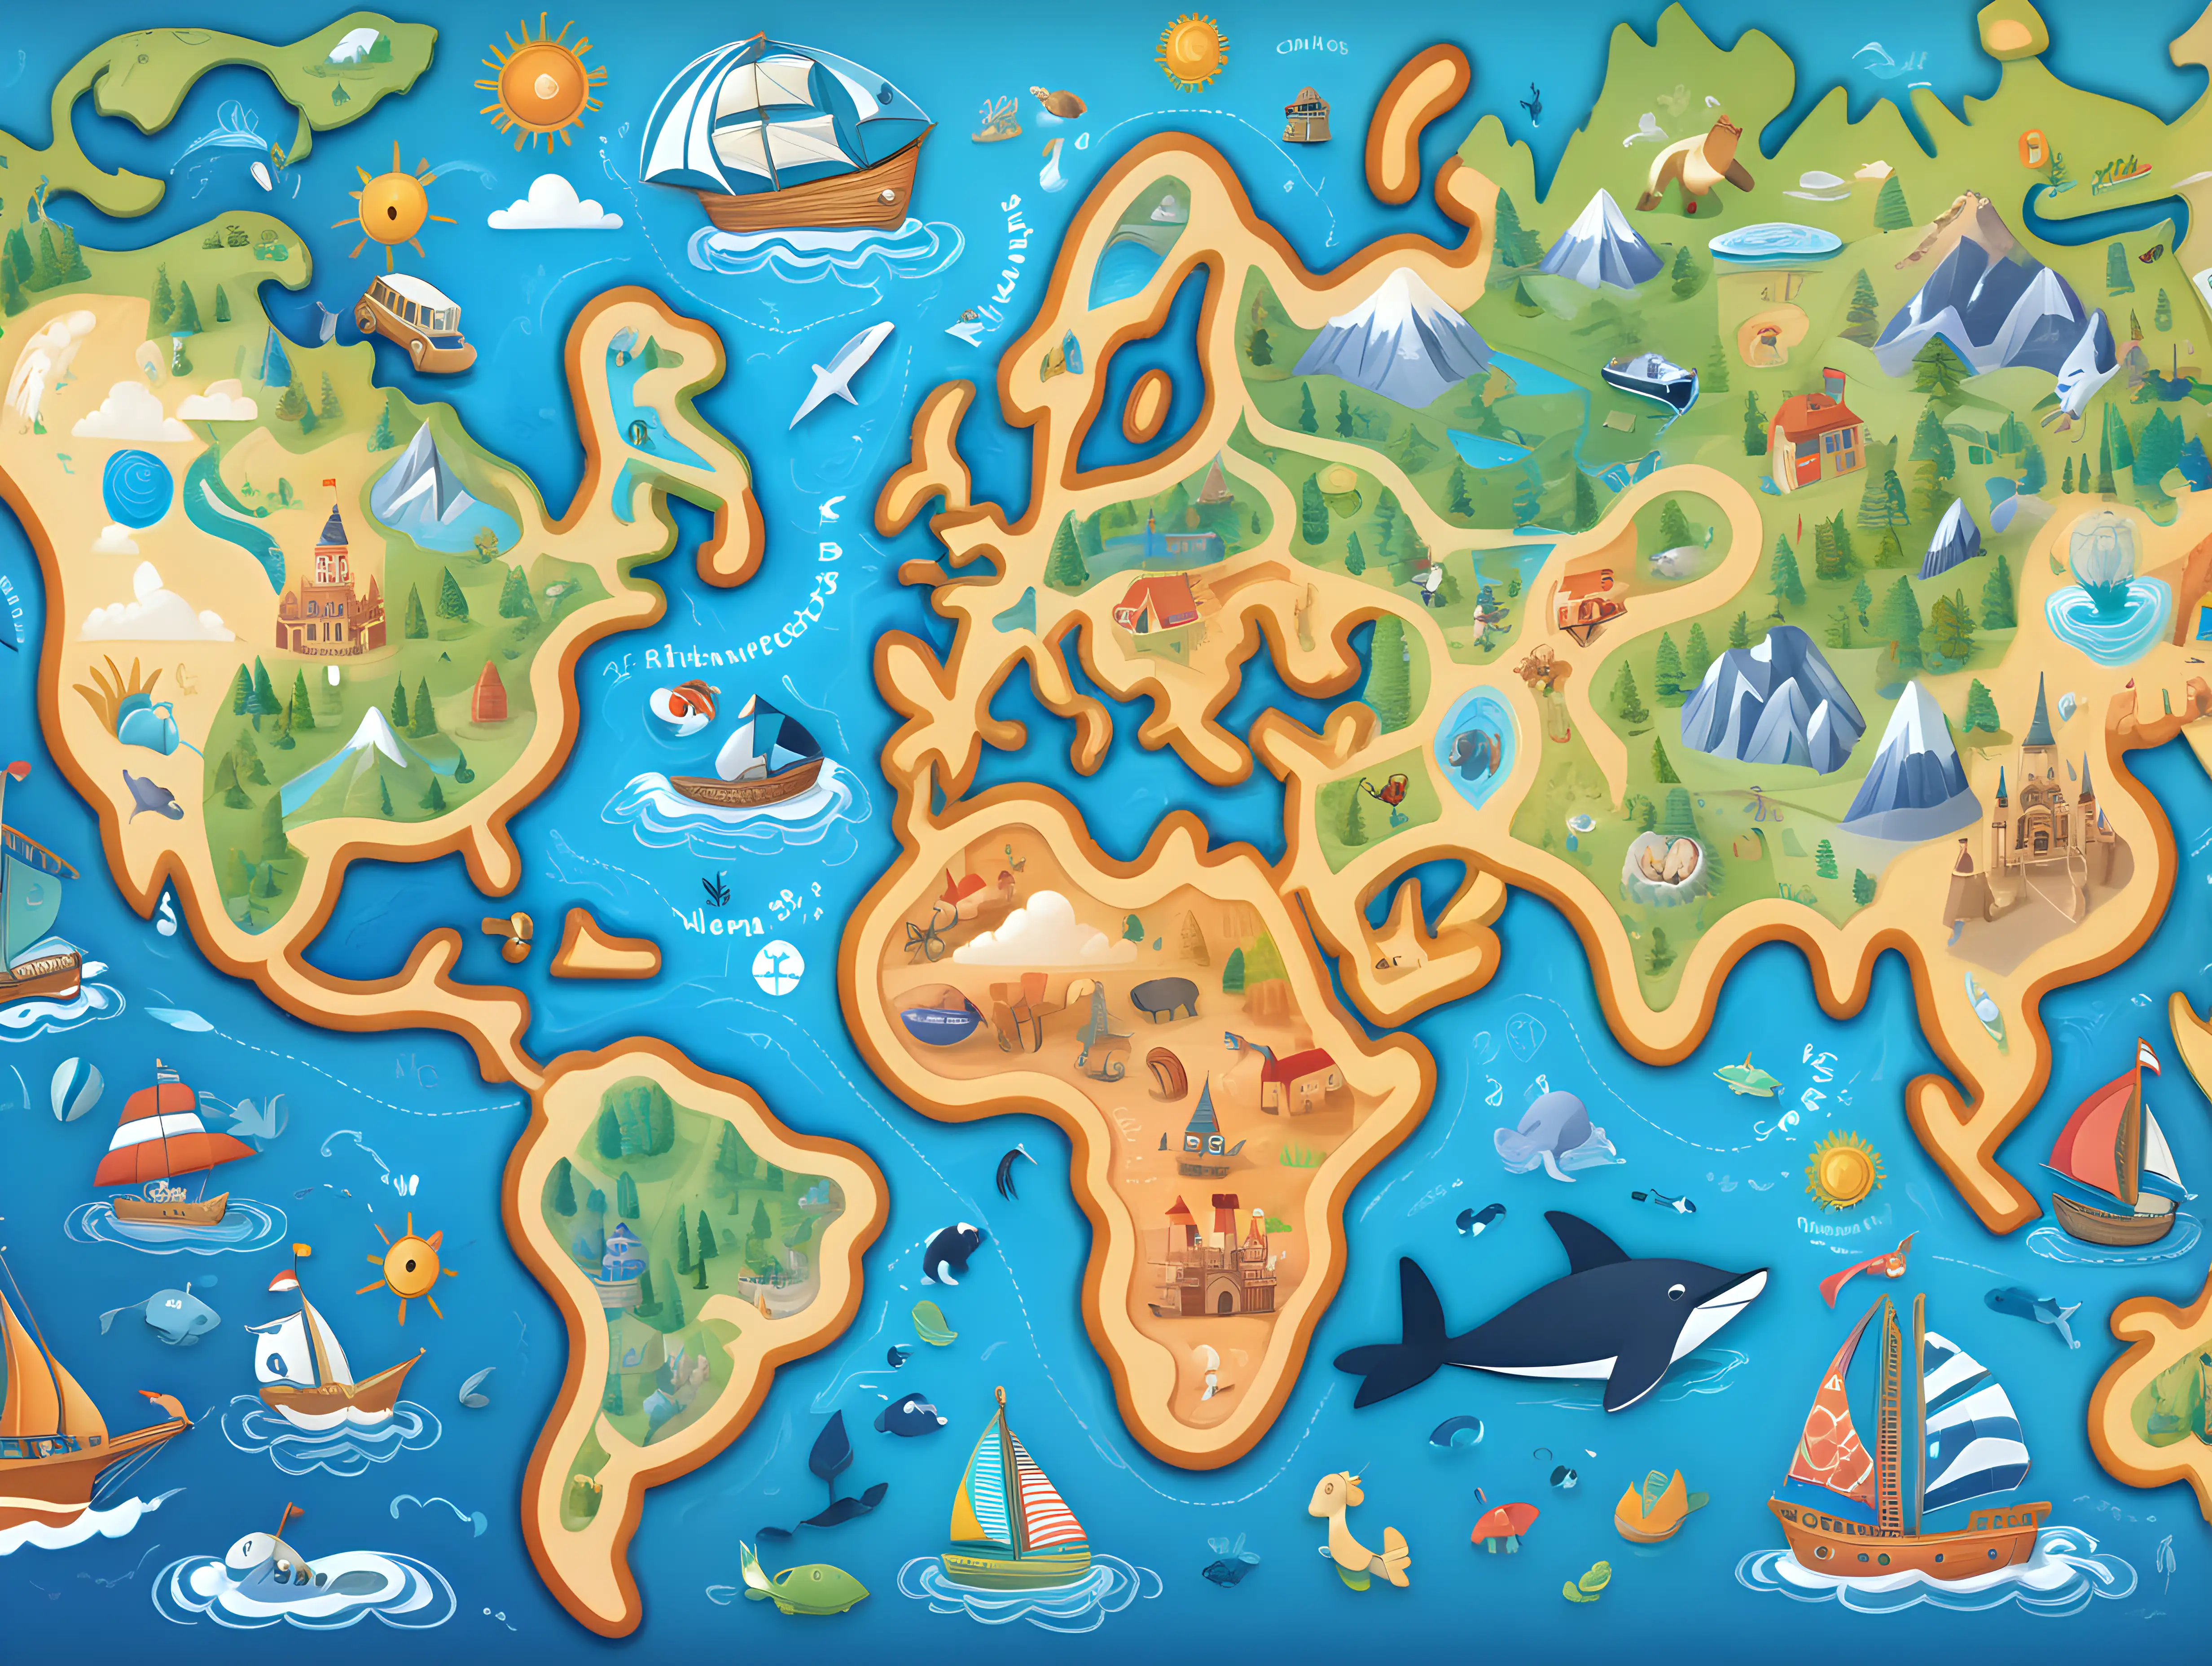 Generate an AI illustration of a whimsical map of the world. Create a vibrant and detailed map with playful elements. The continents and oceans should be filled with intricate patterns and colors, setting the foundation for the child's adventure.